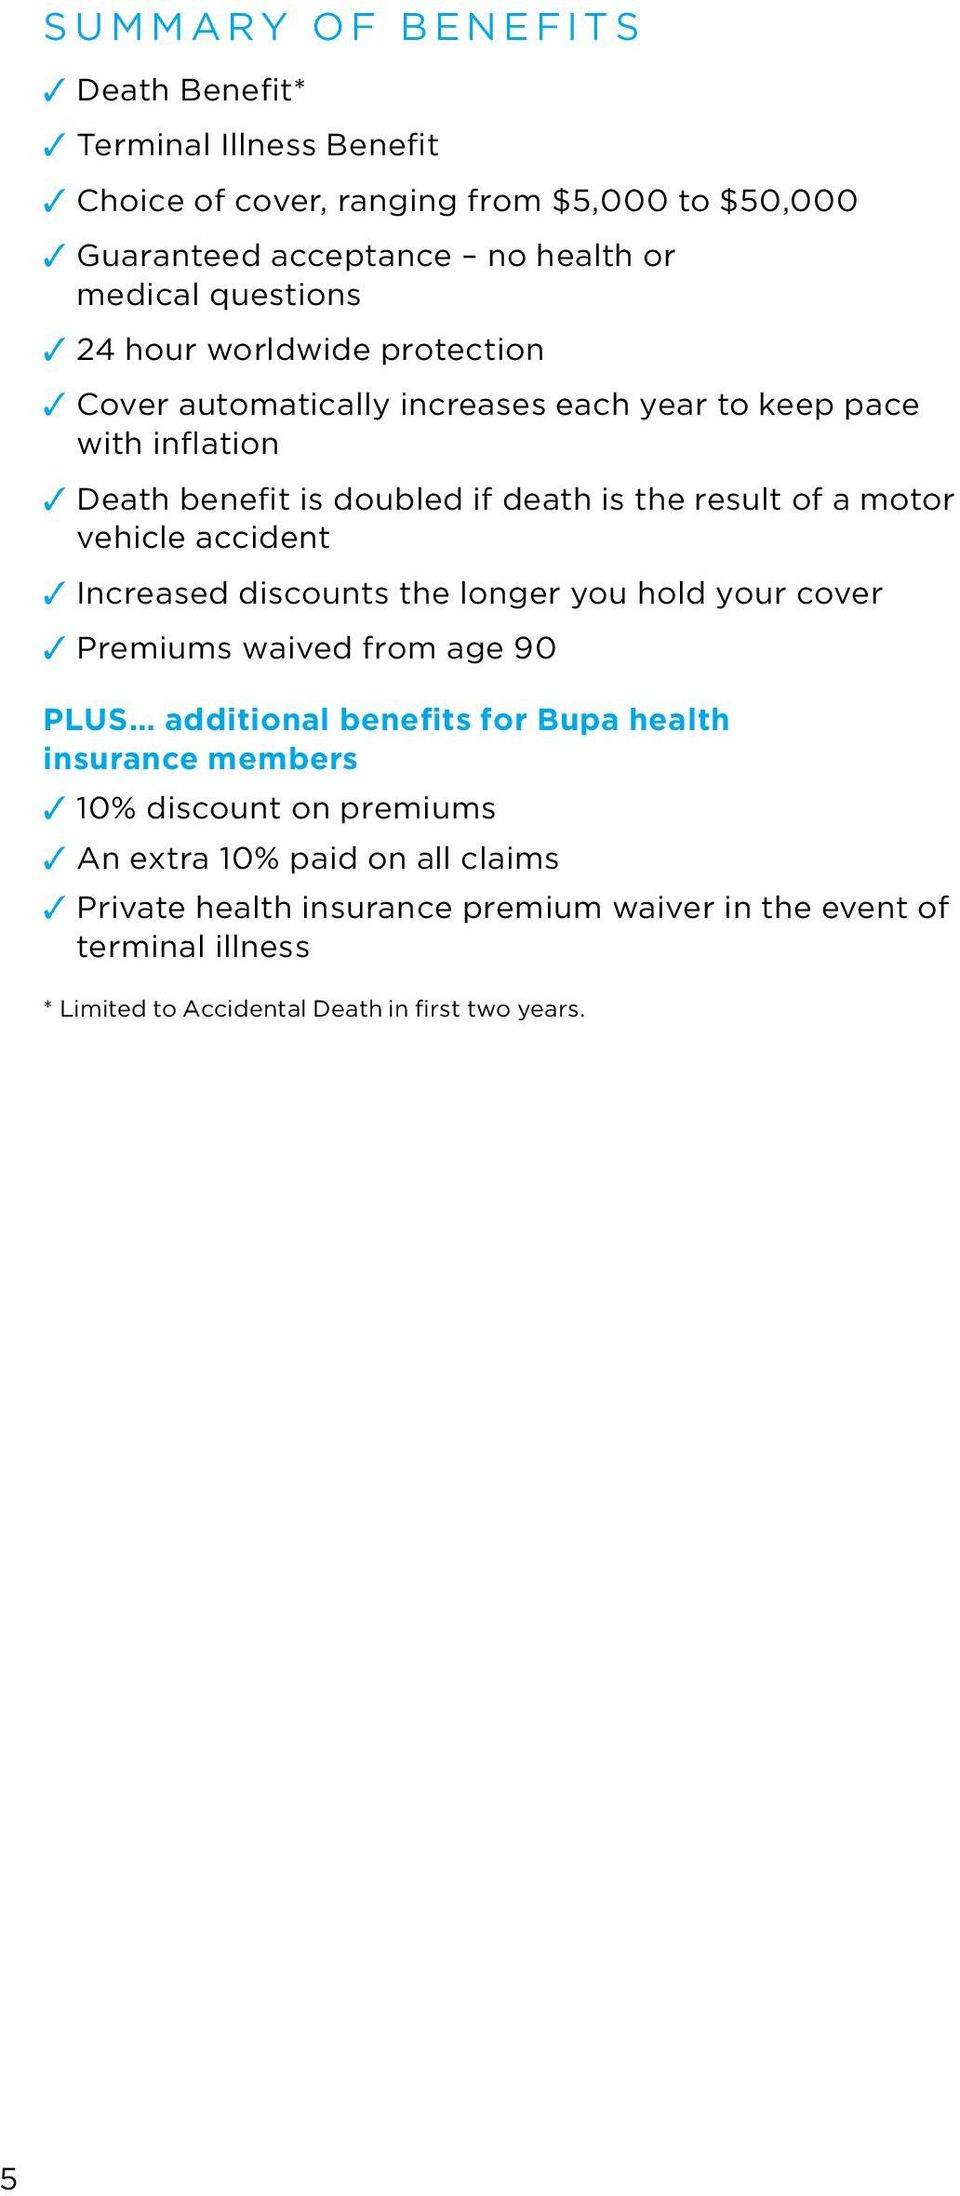 accident Increased discounts the longer you hold your cover Premiums waived from age 90 PLUS additional benefits for Bupa health insurance members 10% discount on